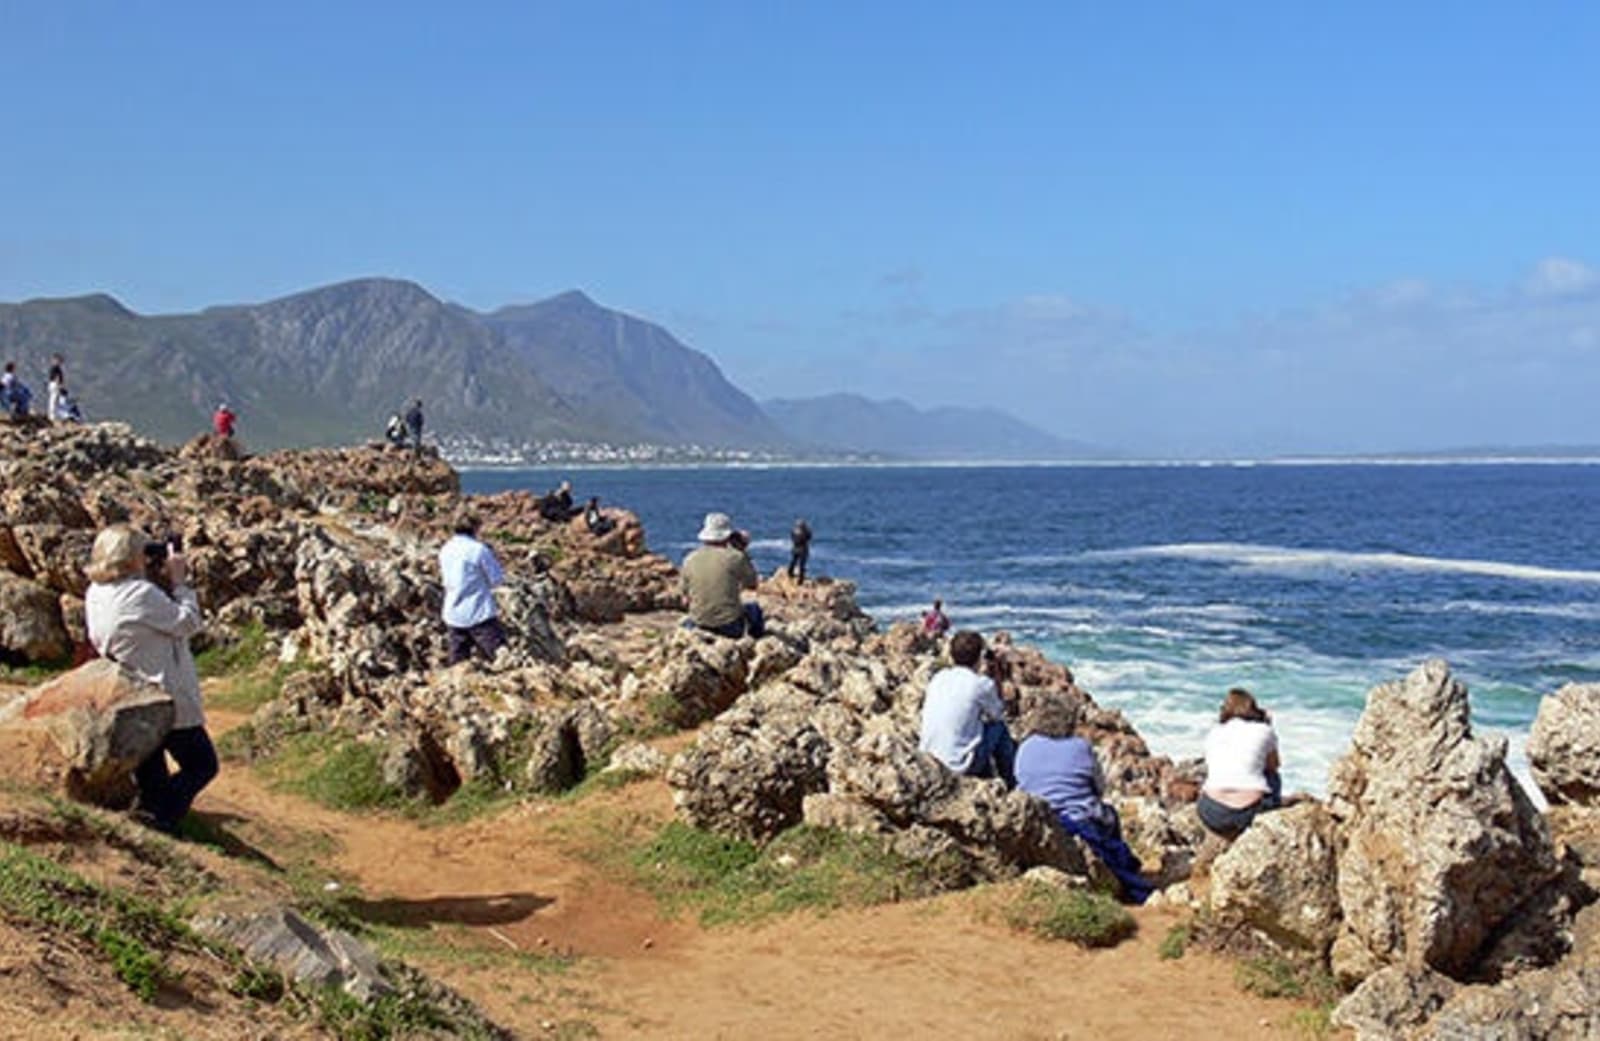 RS-Crowd-whale-watching-in-Hermanus-South-Africa-shutterstock_38660578.jpg